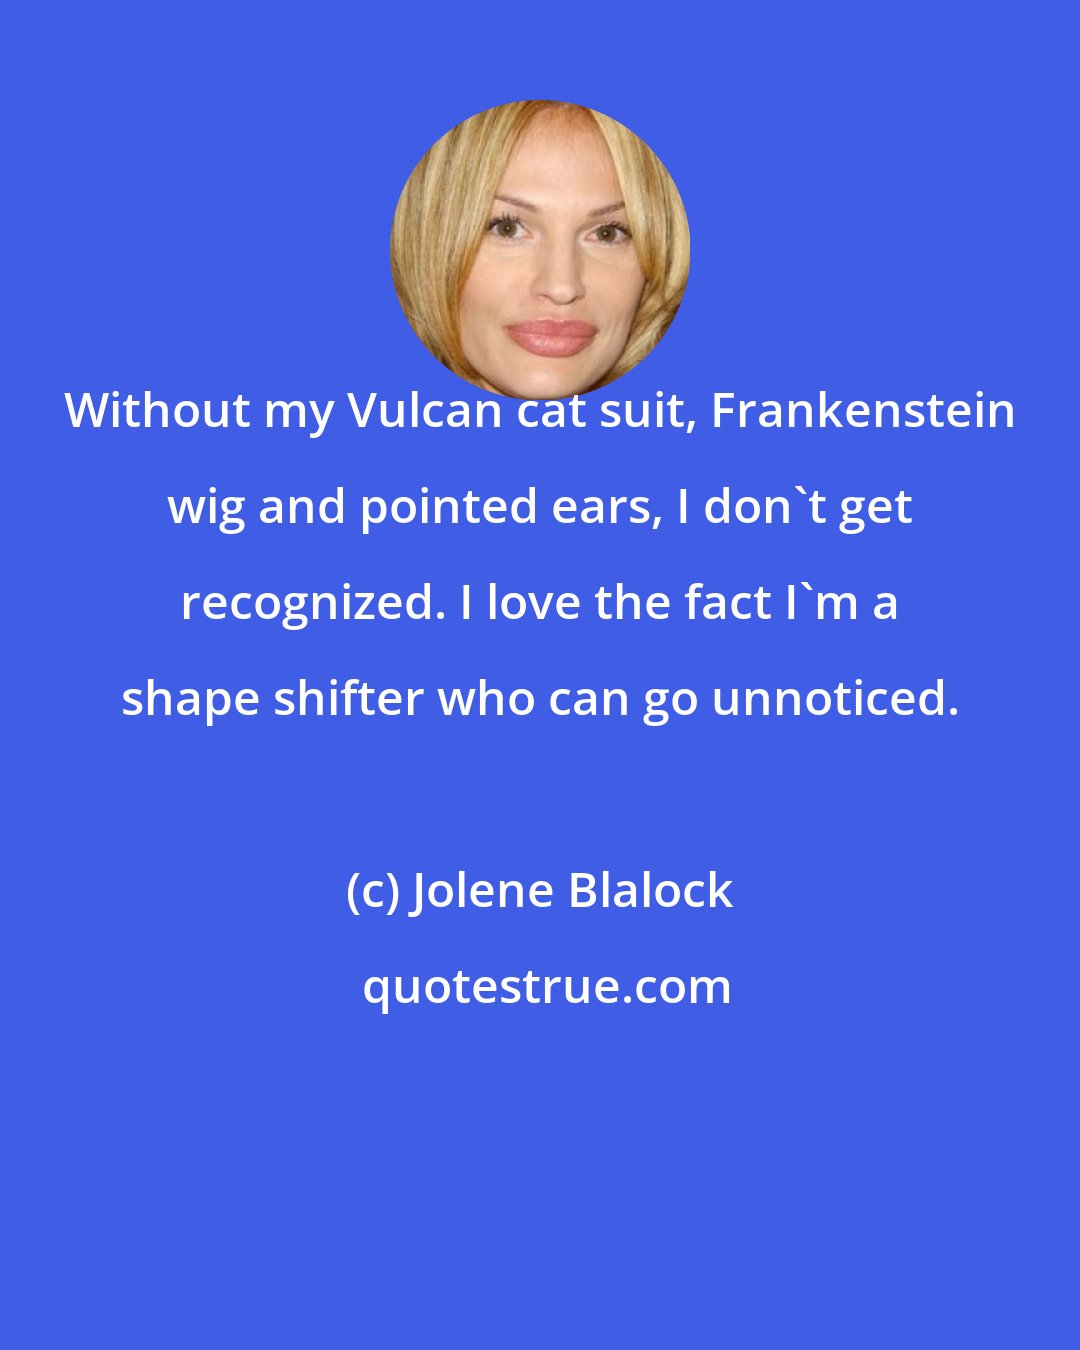 Jolene Blalock: Without my Vulcan cat suit, Frankenstein wig and pointed ears, I don't get recognized. I love the fact I'm a shape shifter who can go unnoticed.